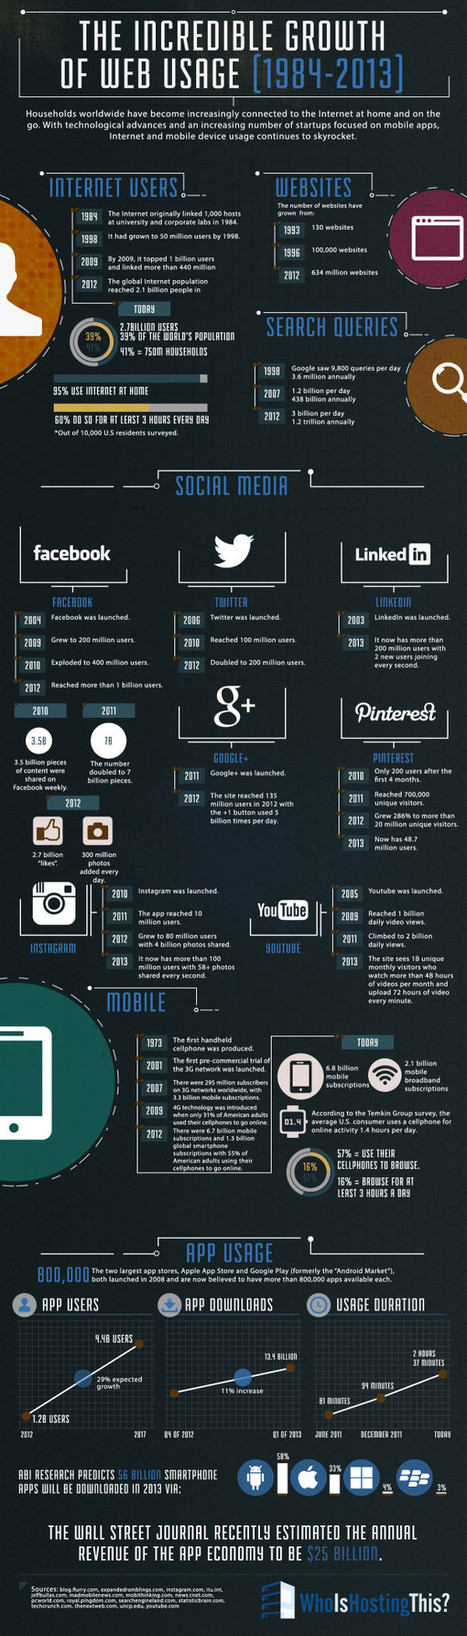 Internet and technology: A history of growth (1984-2013) | Latest Social Media News | Scoop.it